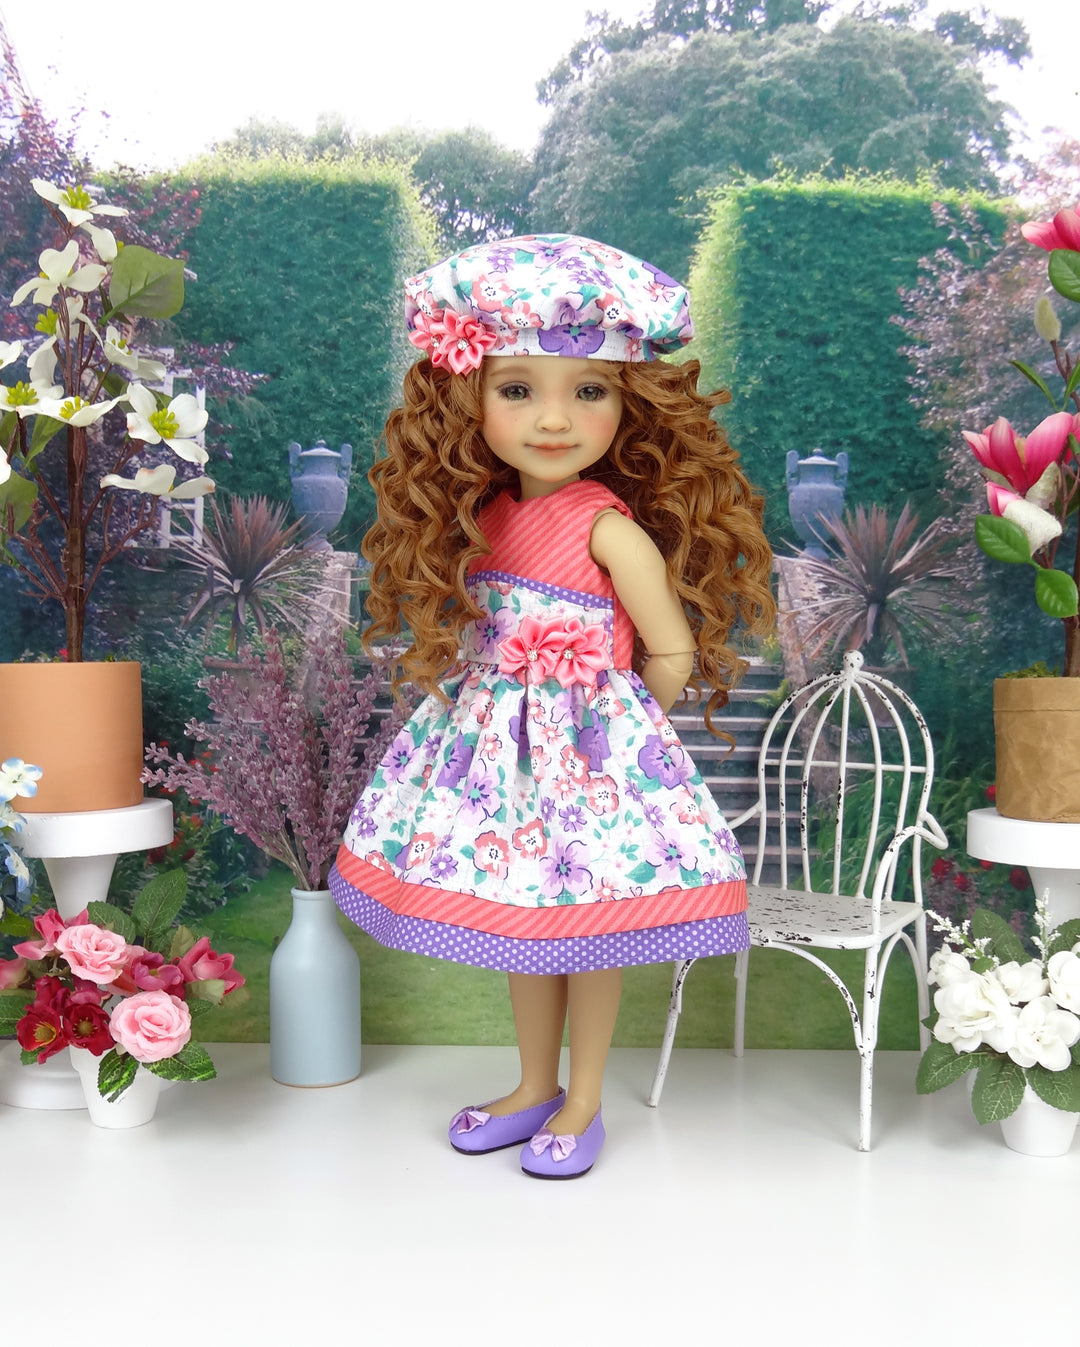 Summer Flowers - dress and shoes for Ruby Red Fashion Friends doll